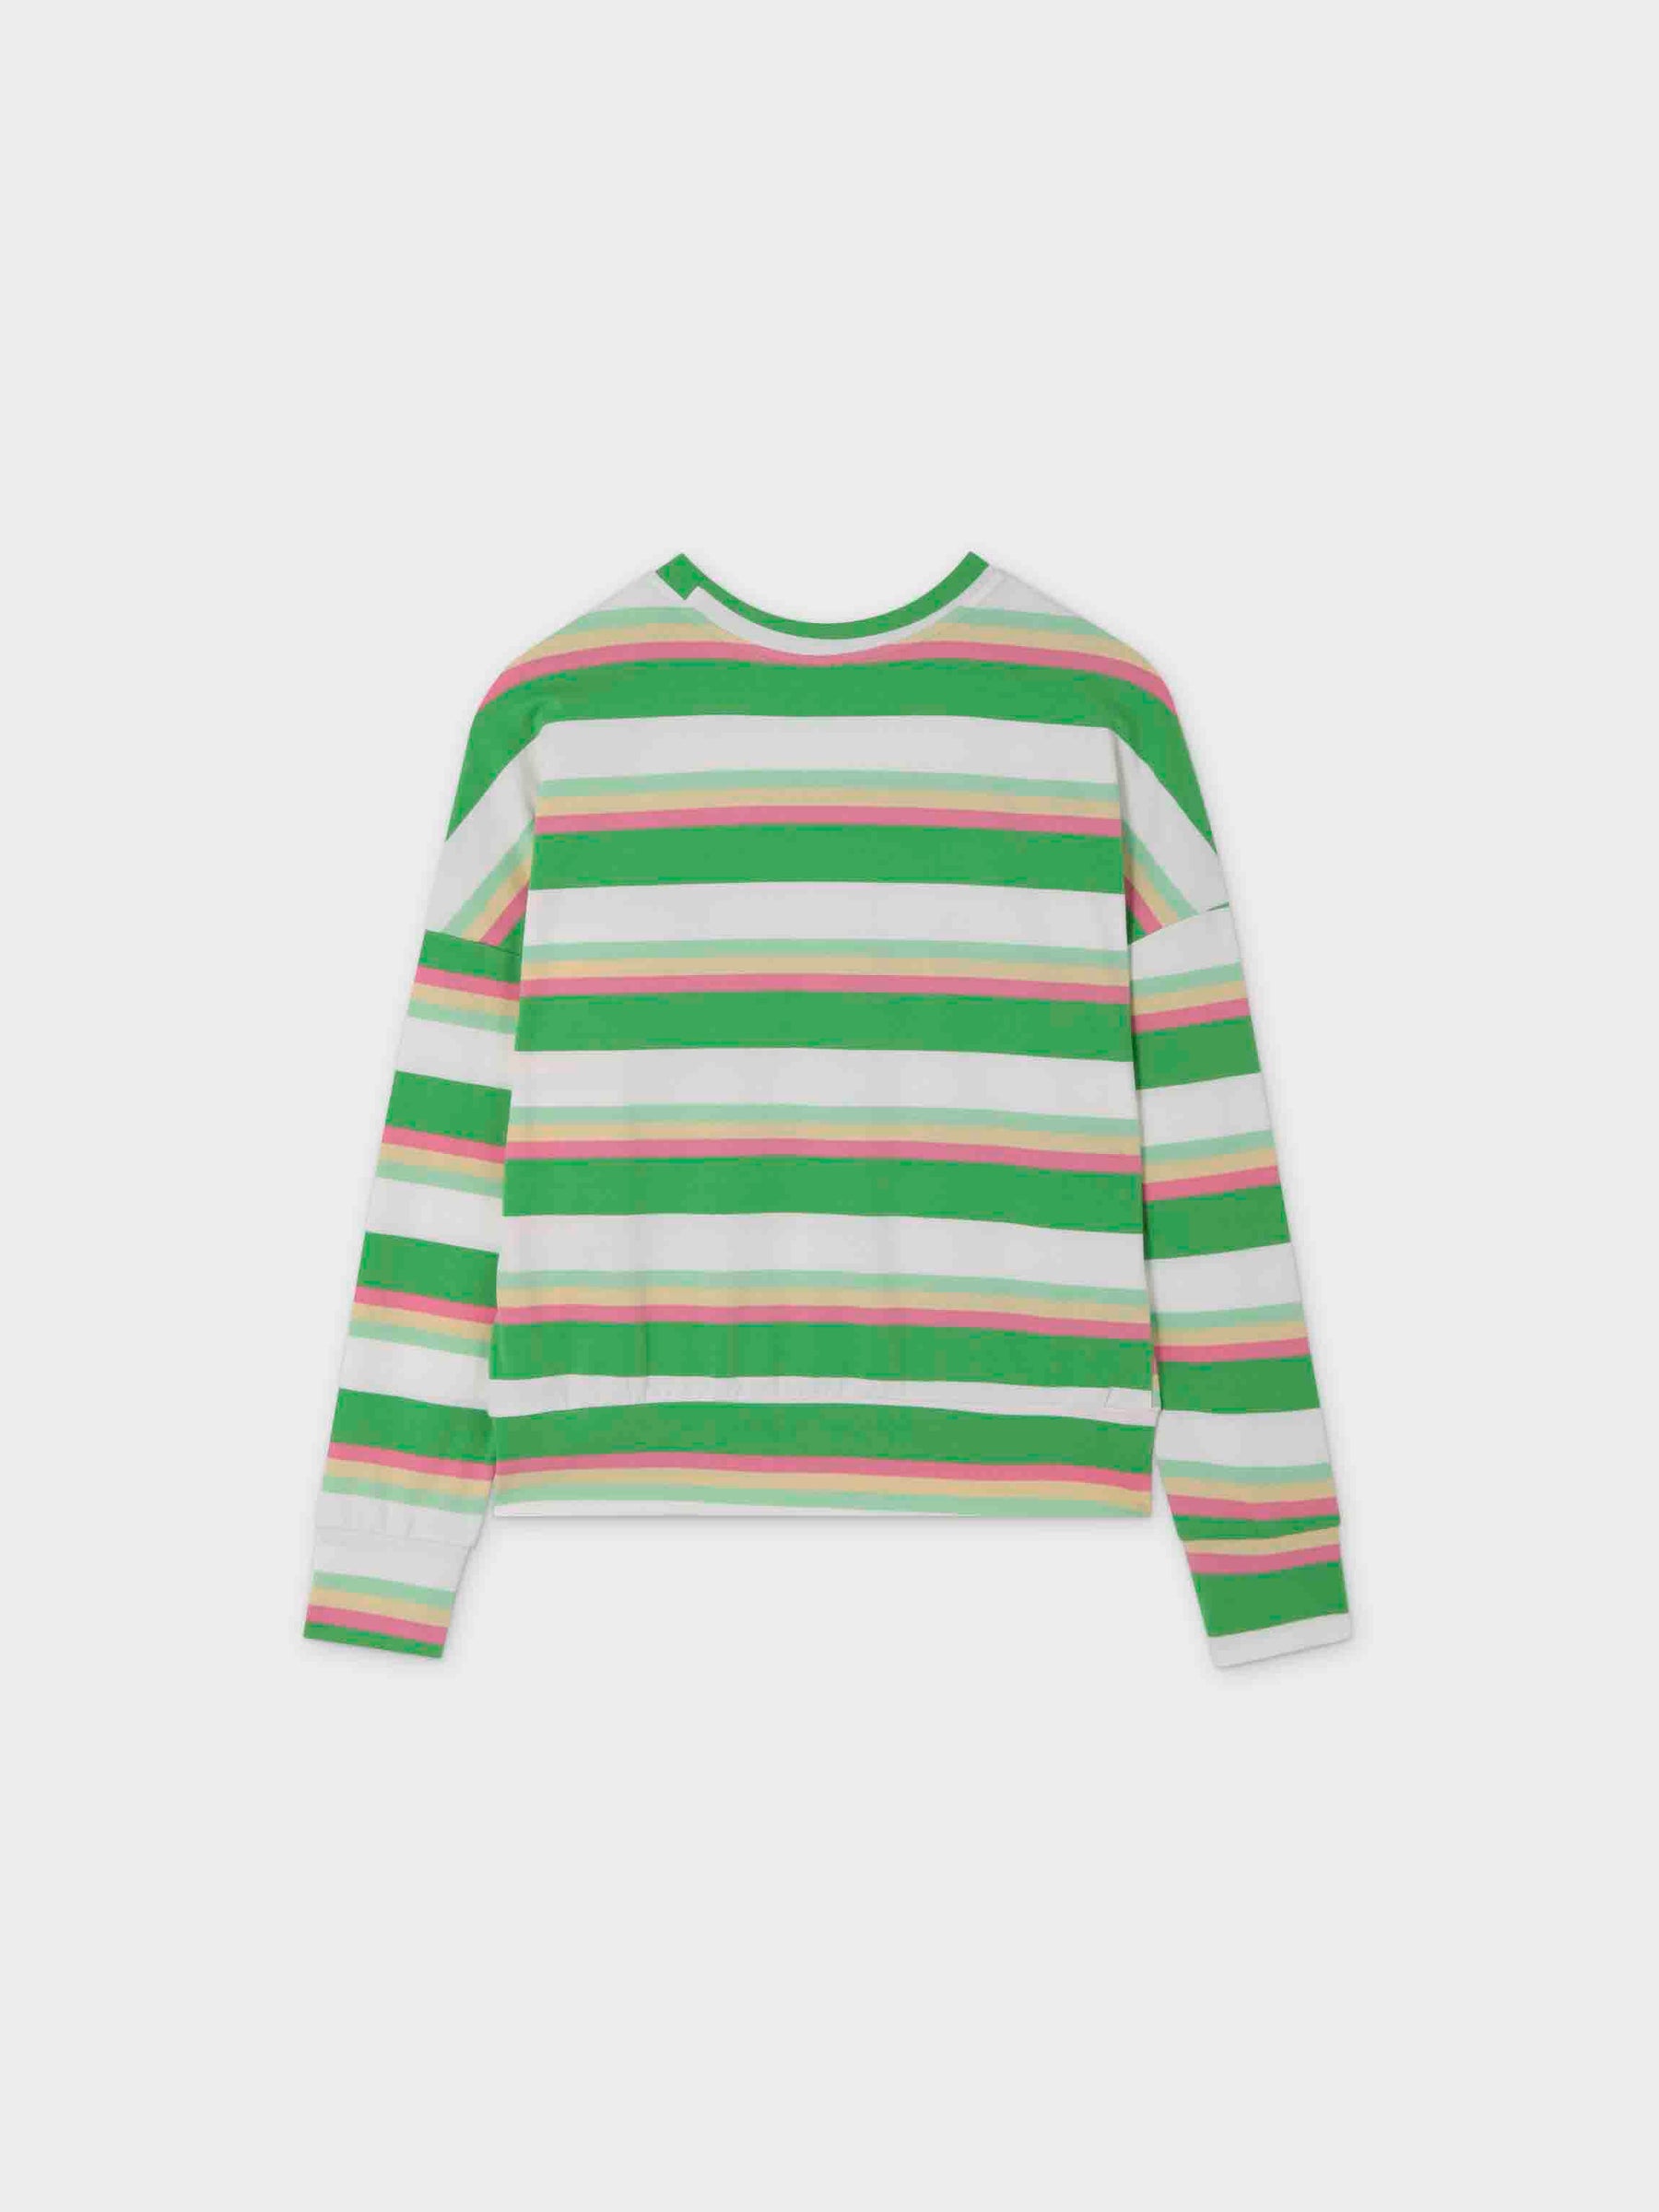 Striped Bomber-Green/Pink